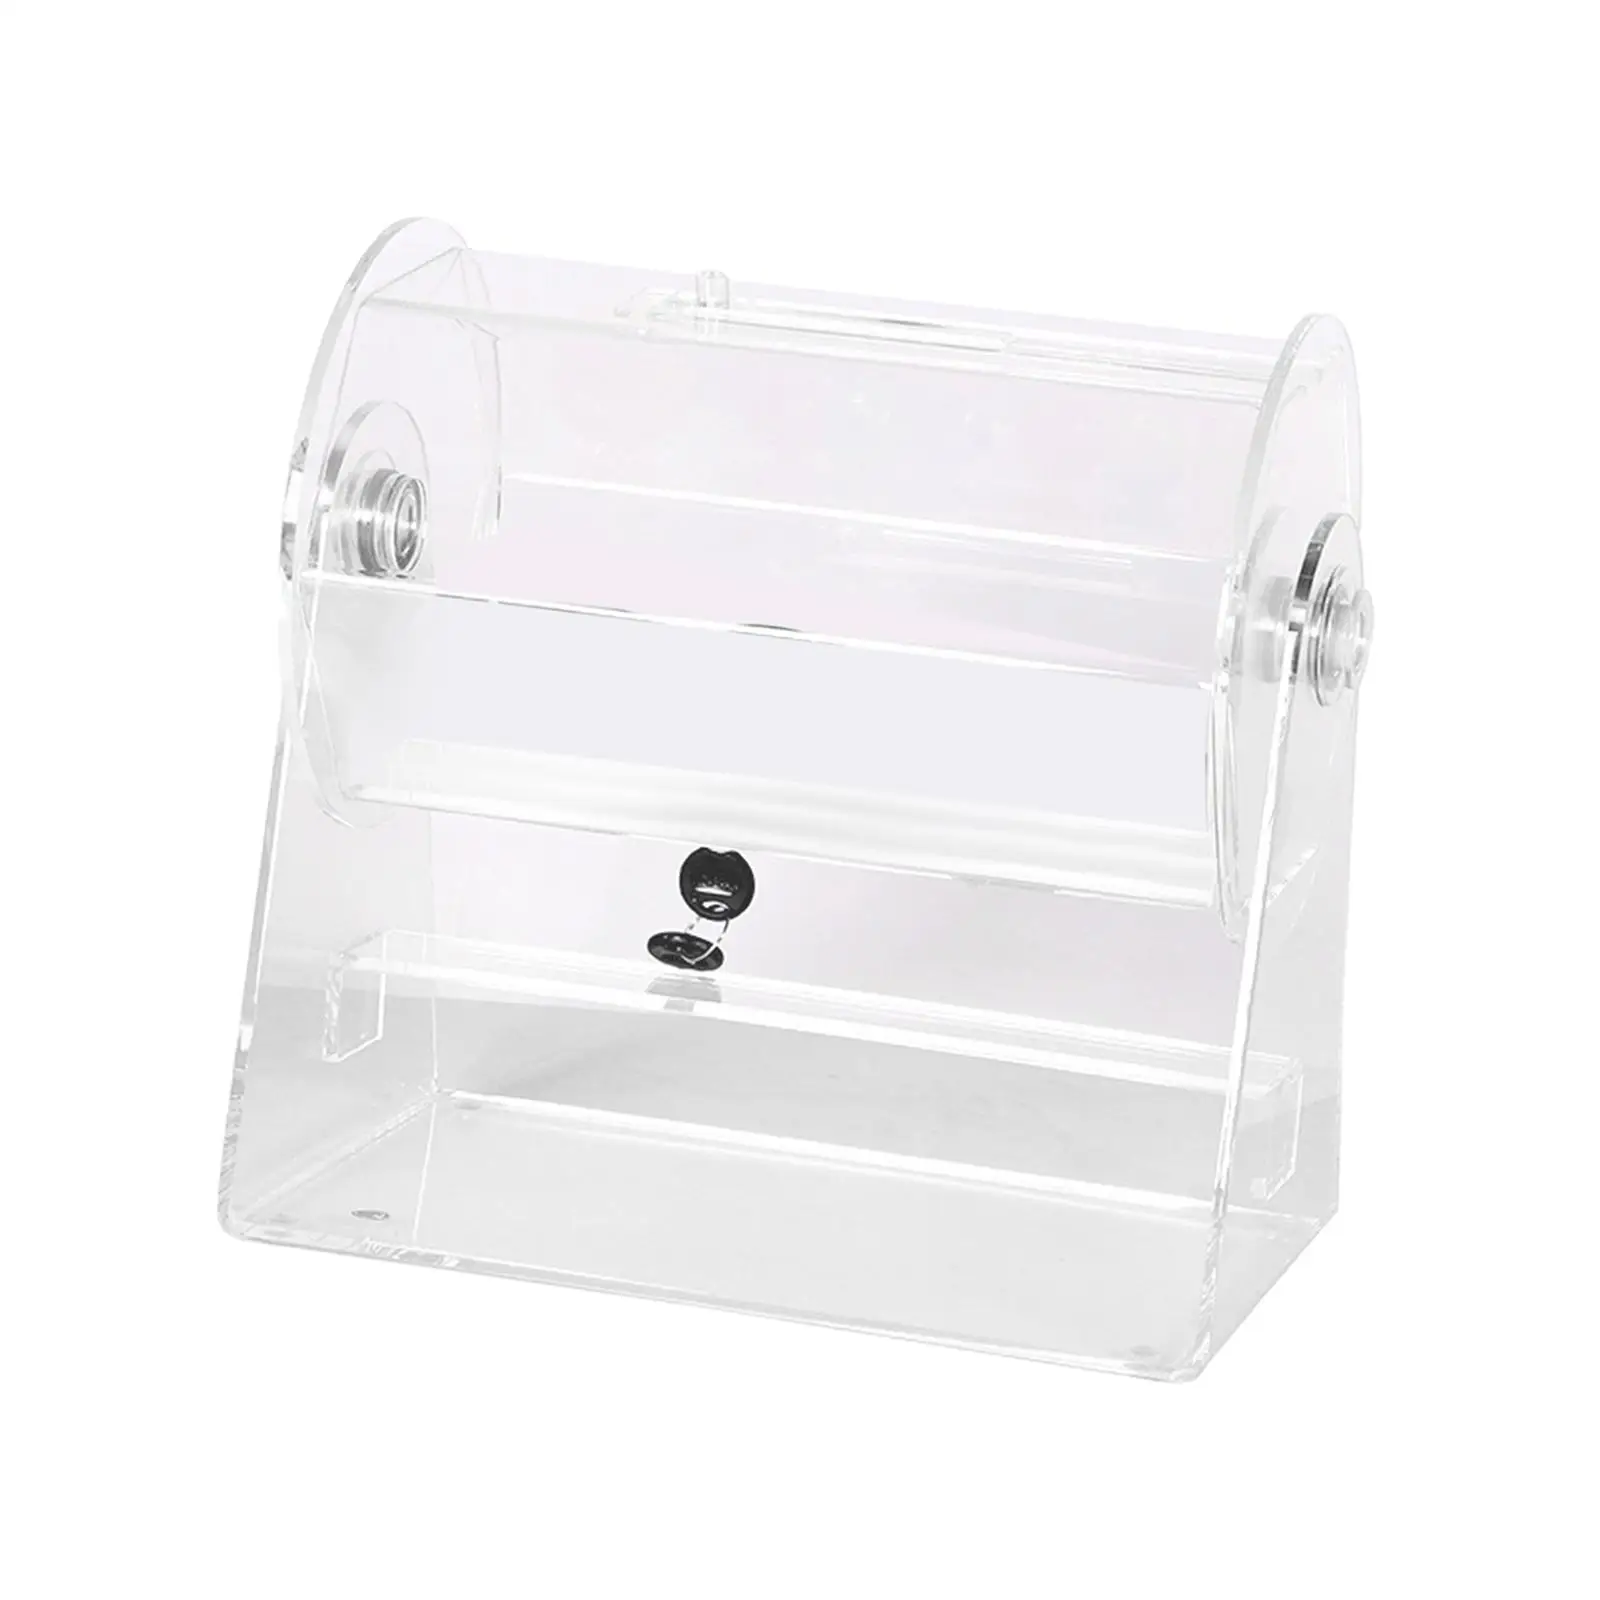 Acrylic Raffle Drum Parent Child Games Raffle Case Turntable Selection Machine Lottery Portable Lottery Machine for Holiday Home